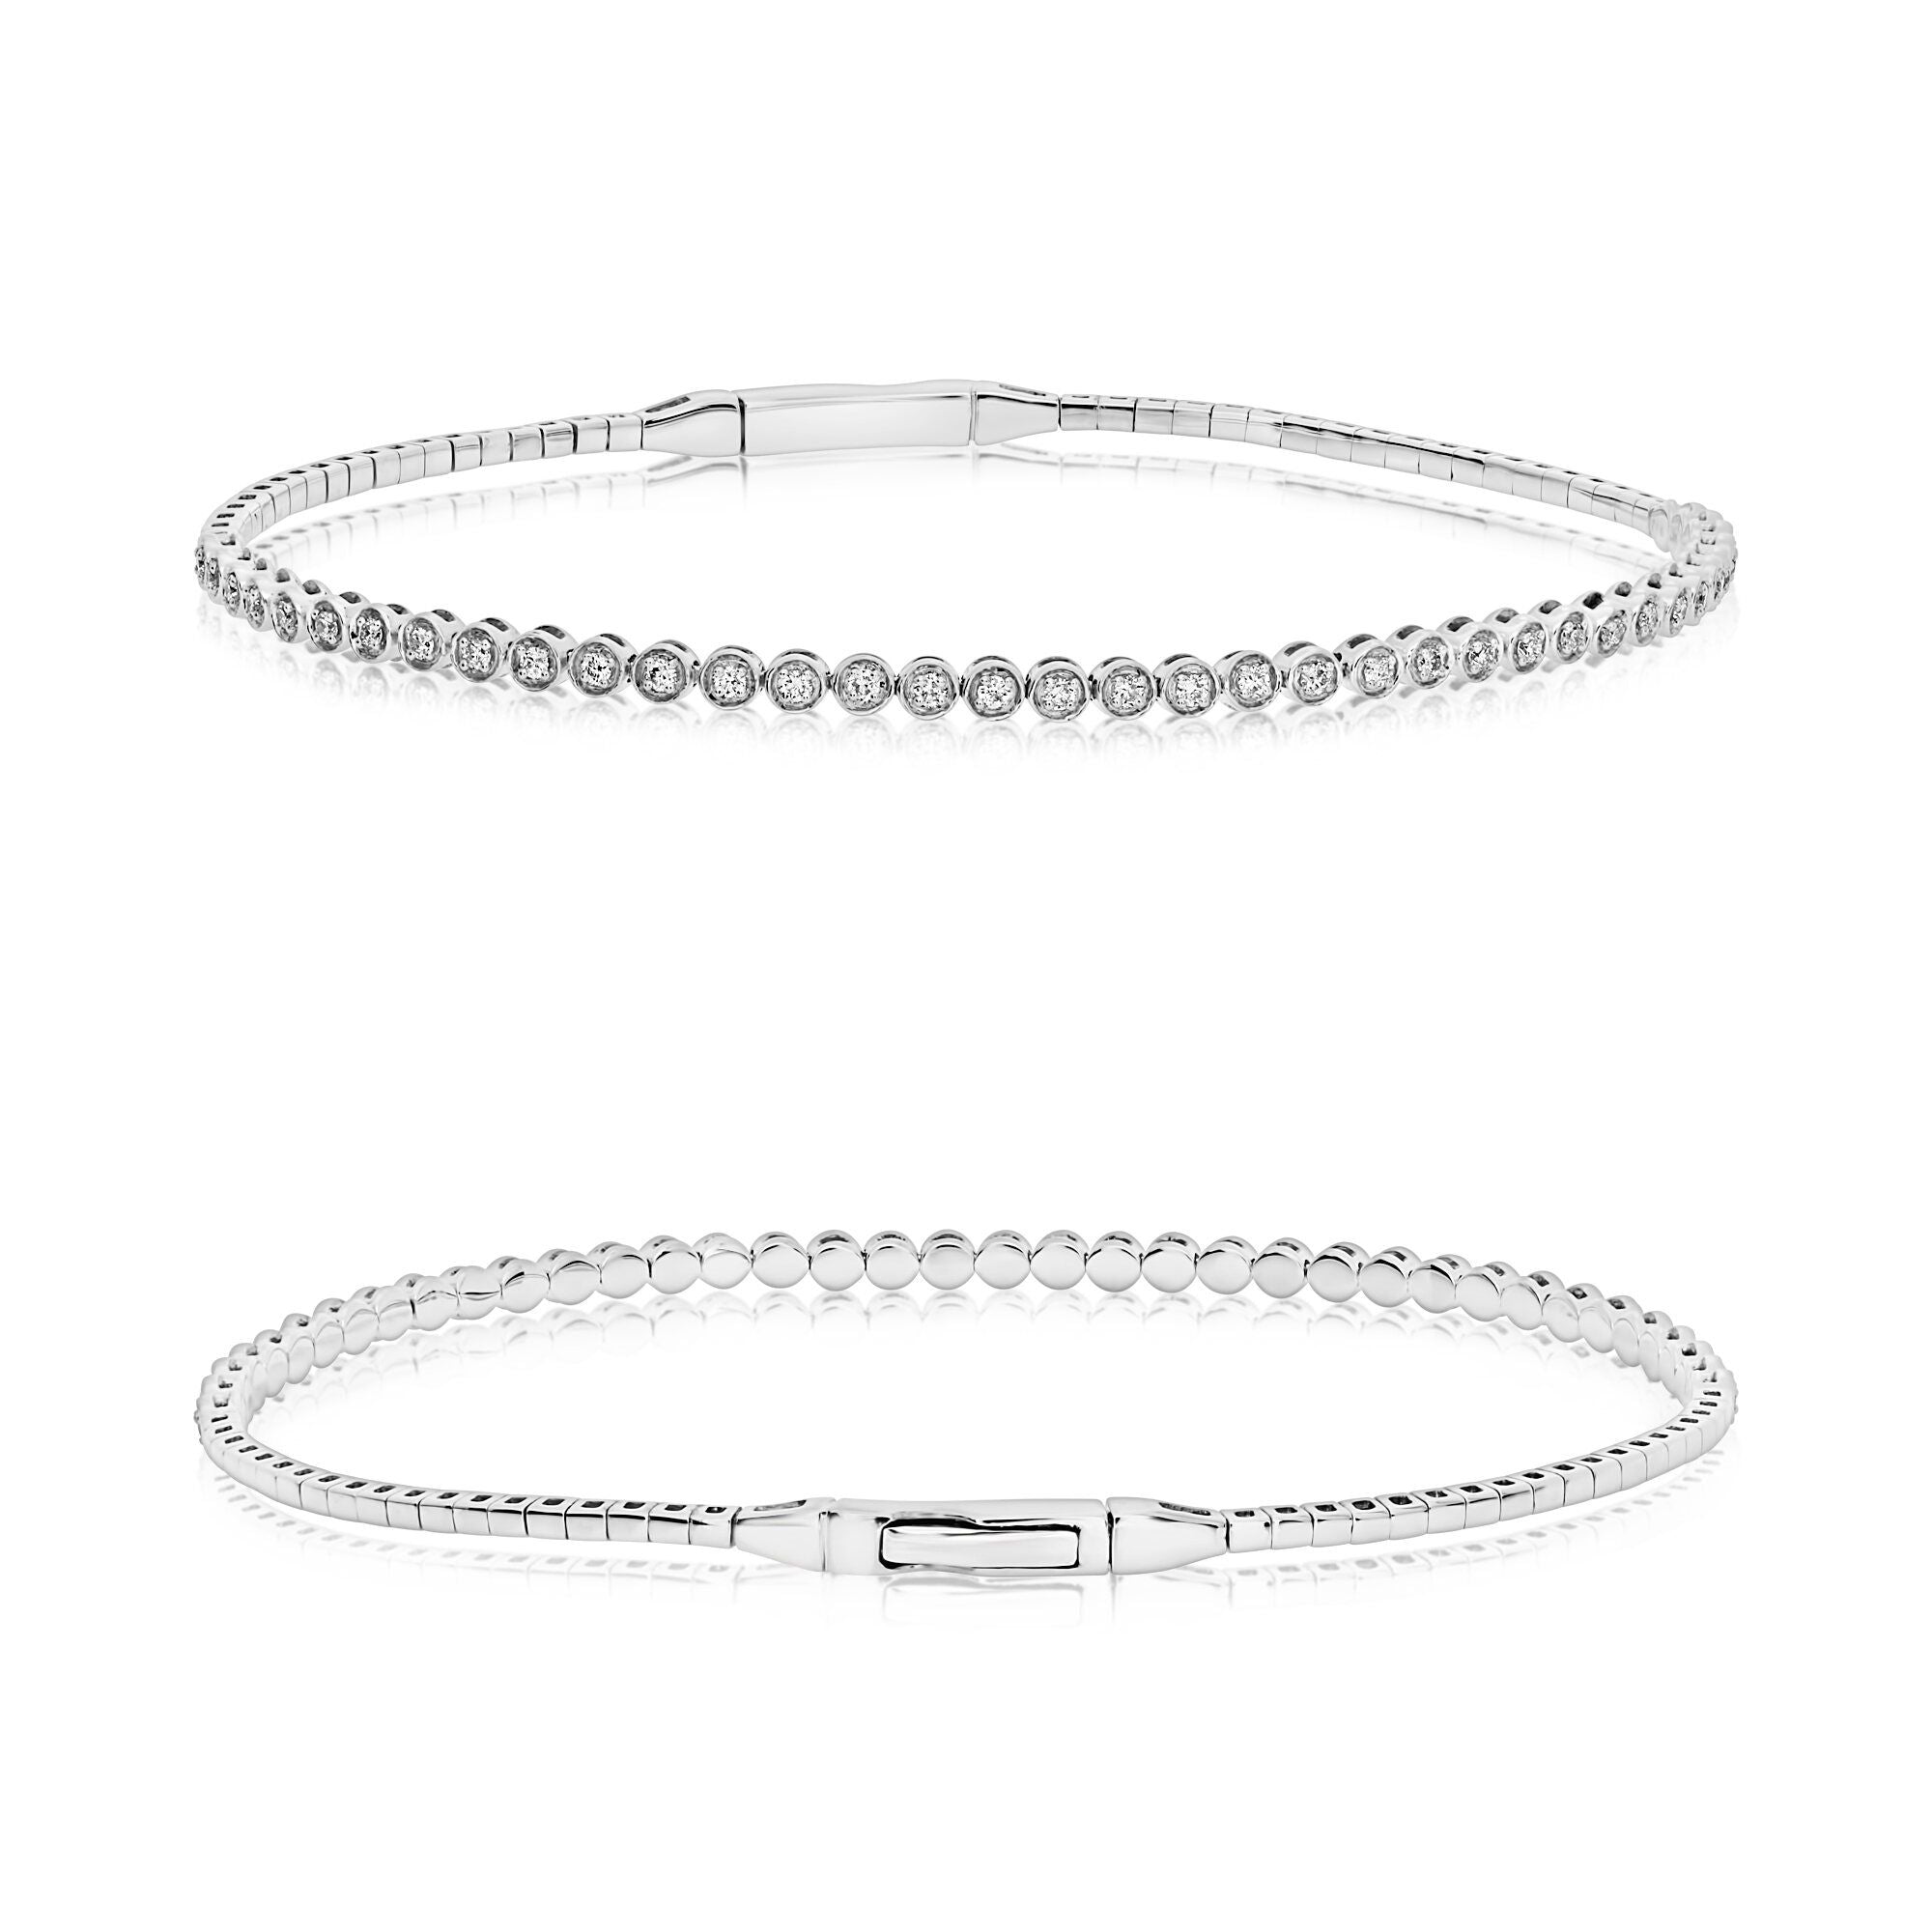 White gold bangle with .30 carat diamond accents, radiating timeless beauty